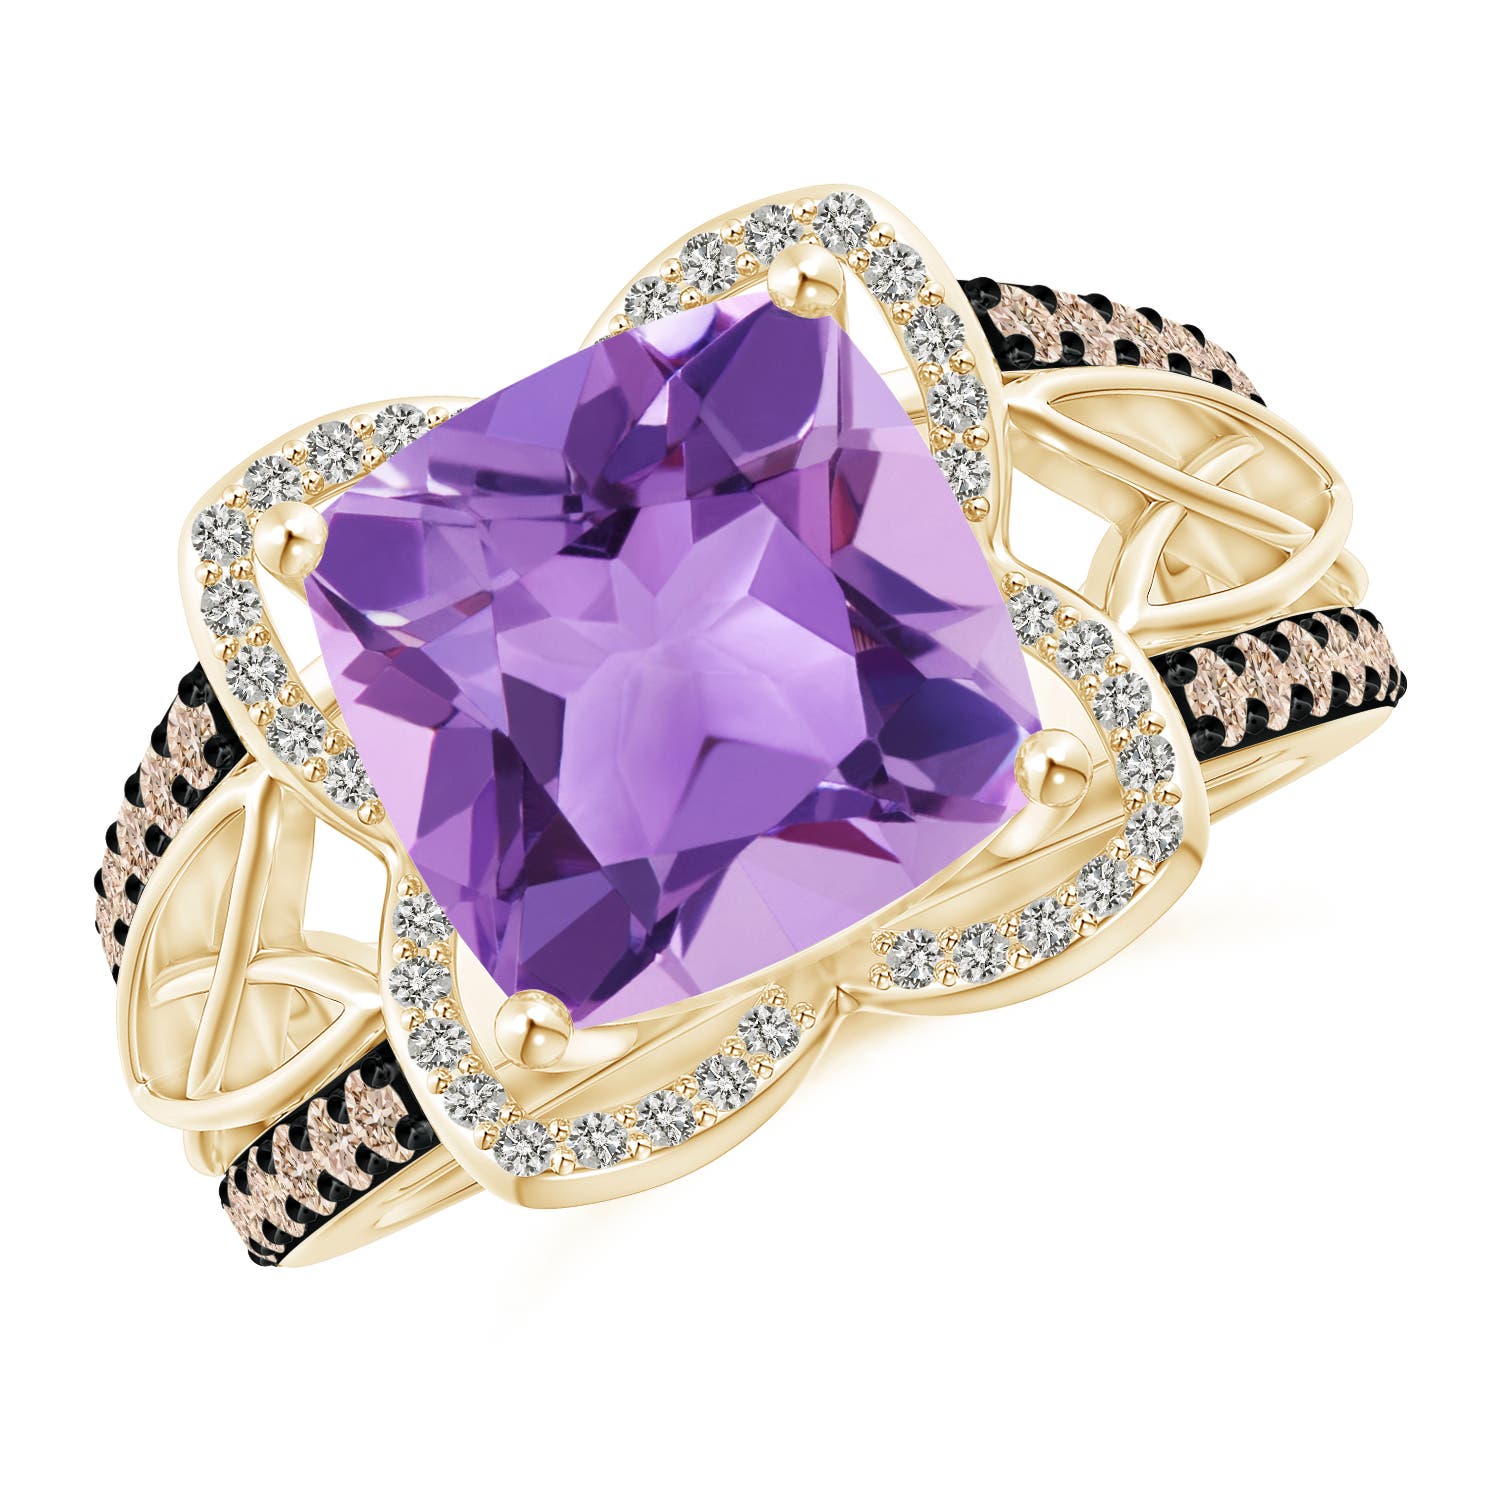 A - Amethyst / 4.41 CT / 14 KT Yellow Gold